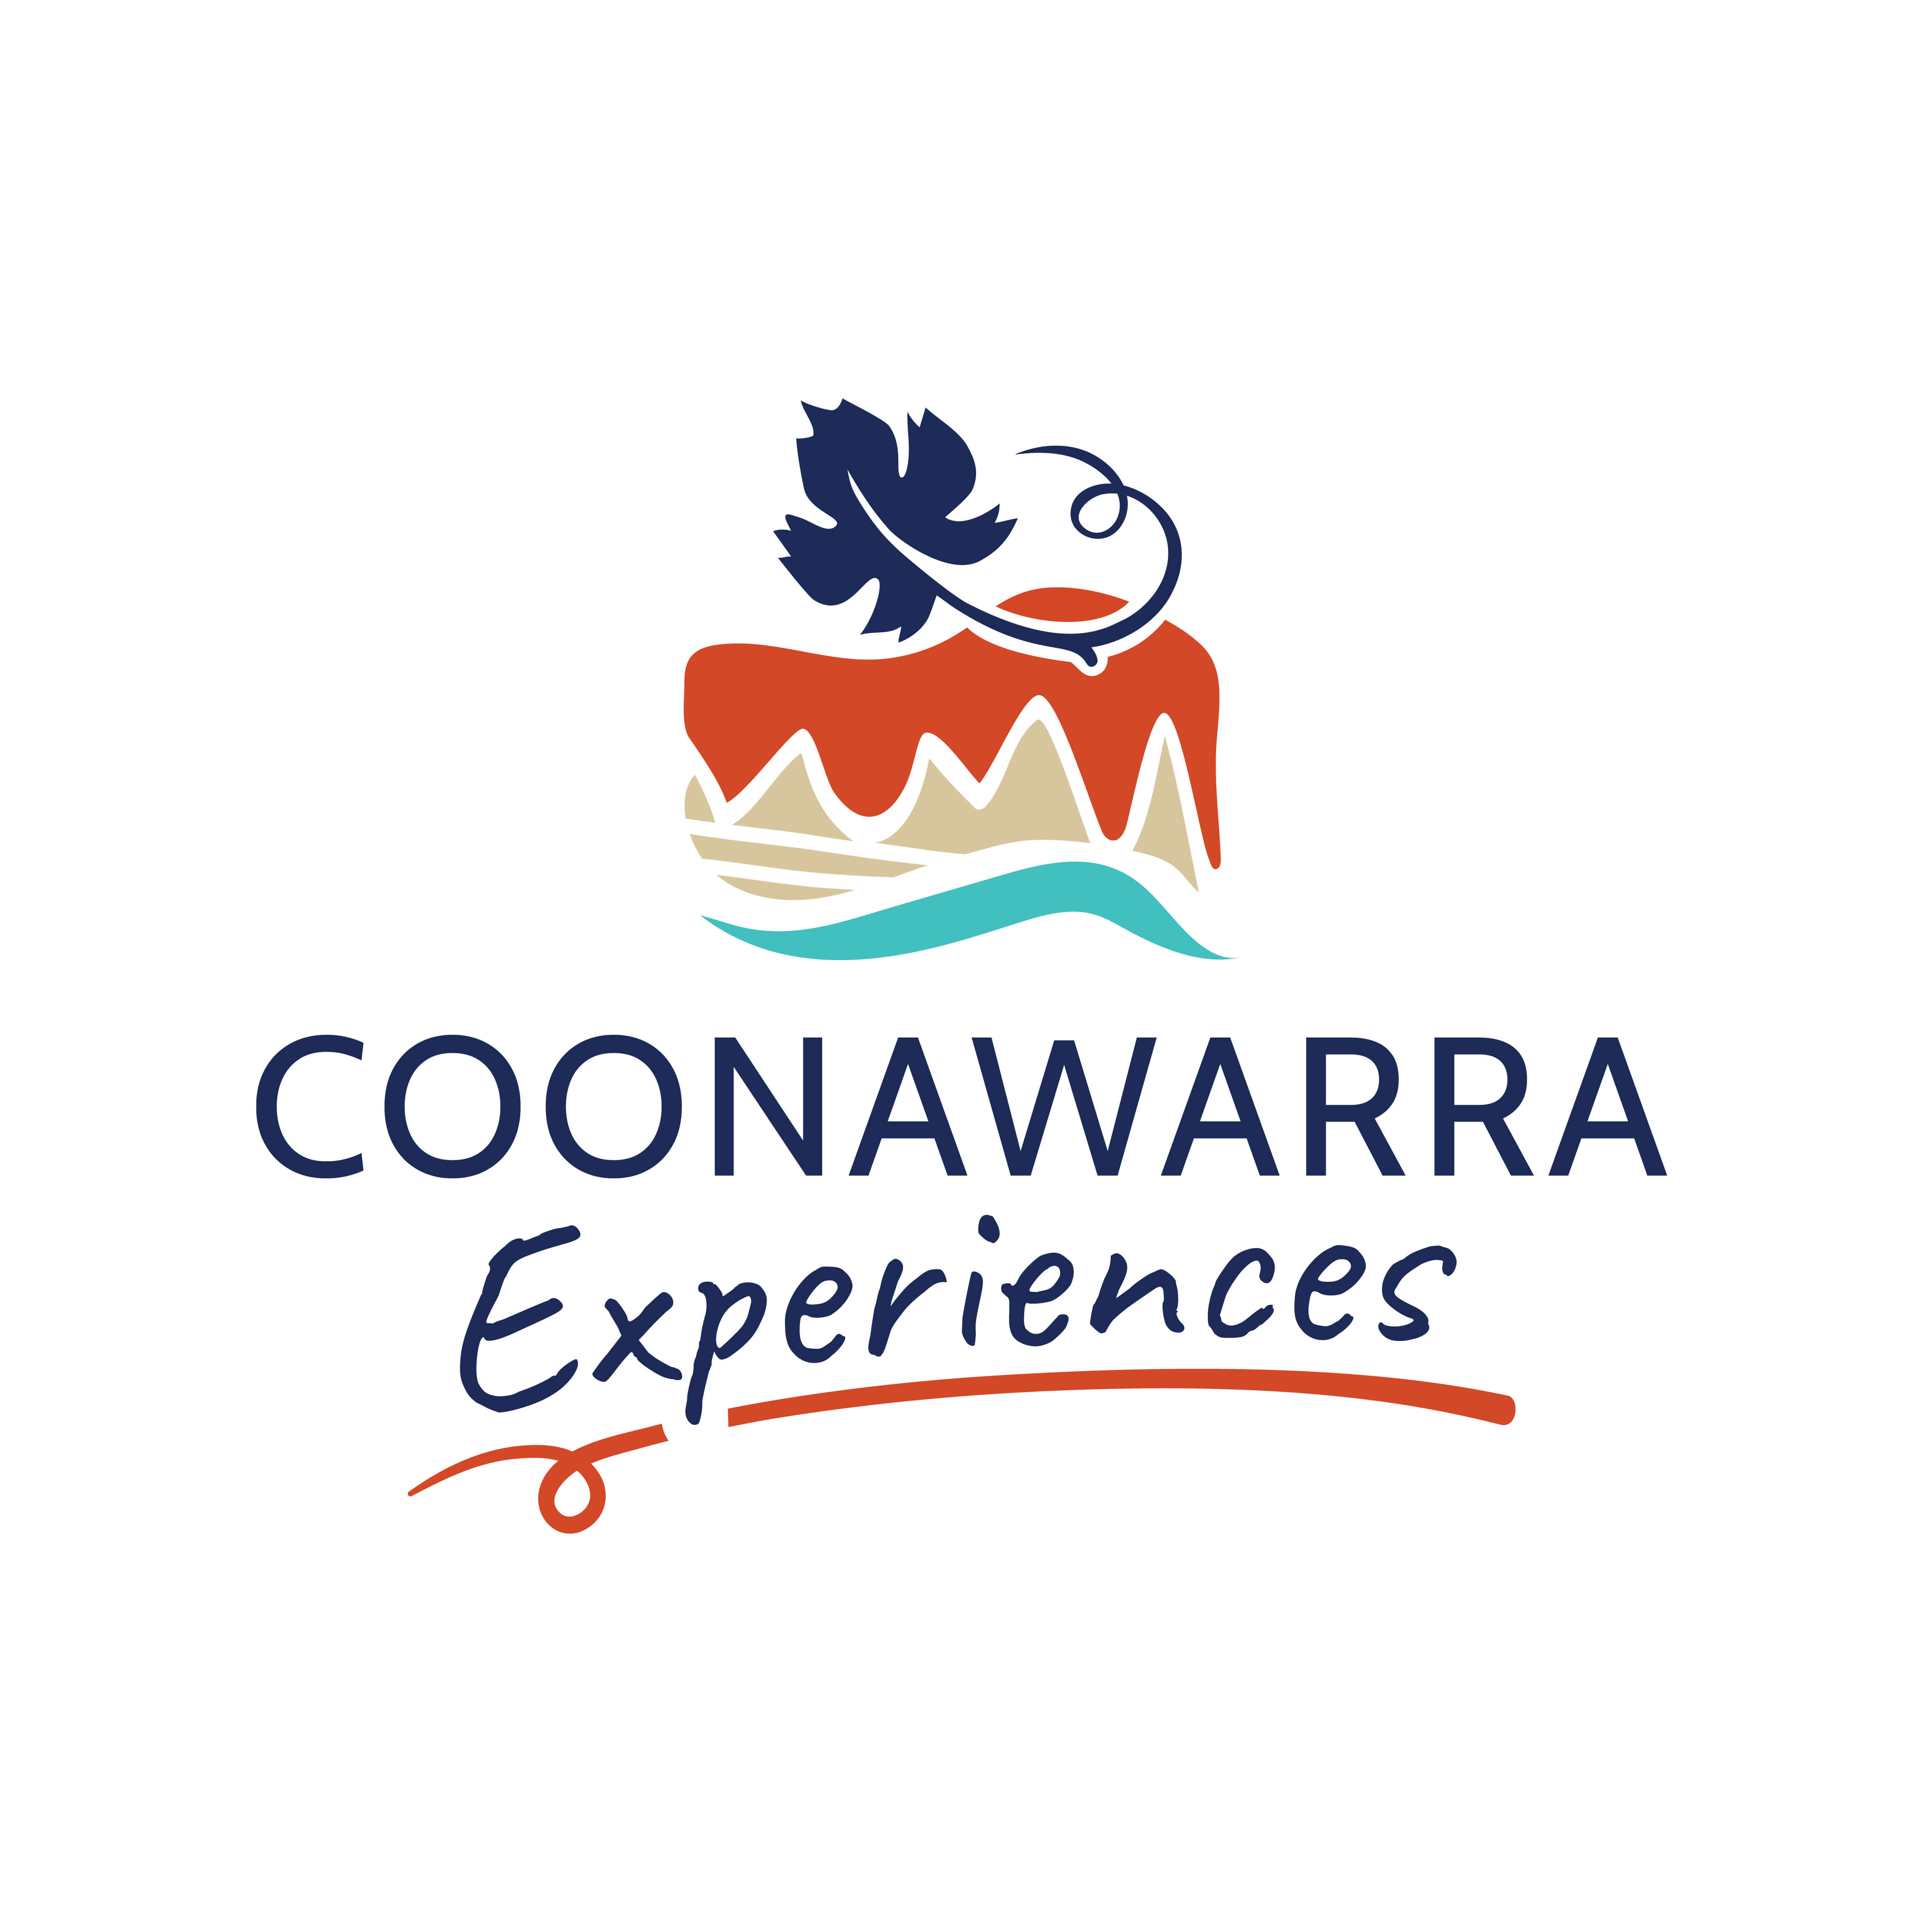 Things to do in Coonawarra